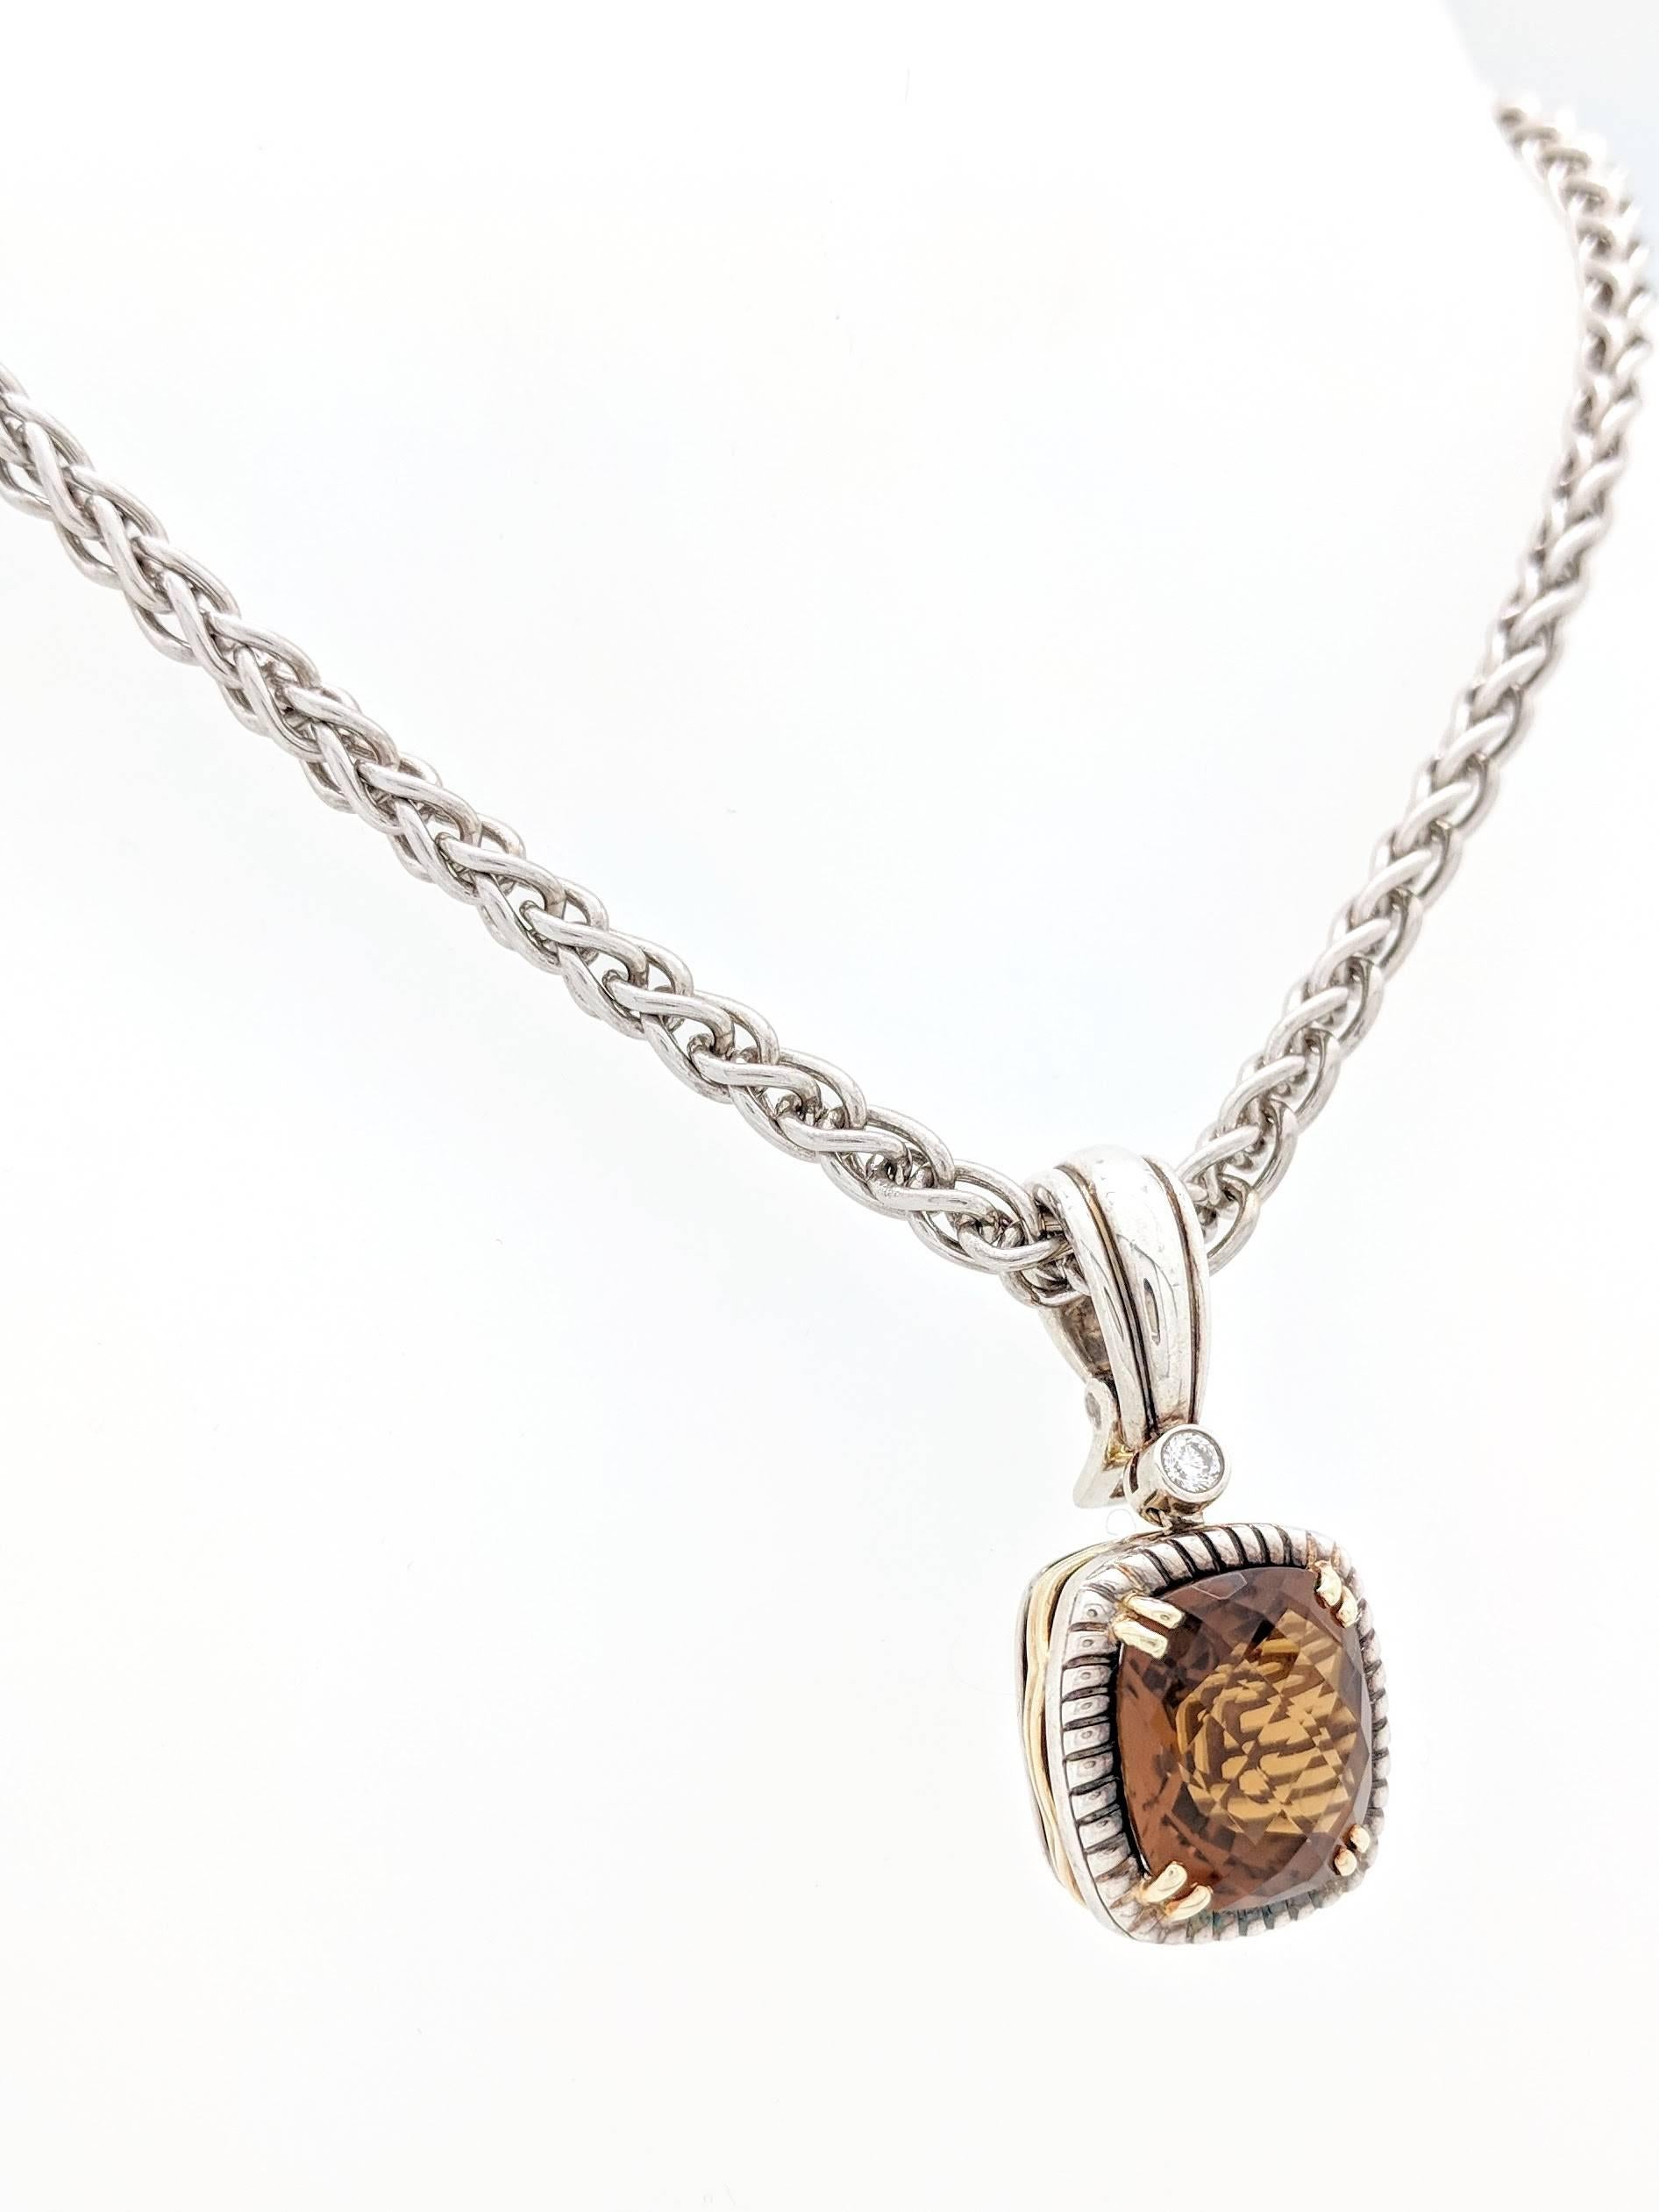 Contemporary Charles Krypell 925 and 14 Karat Gold Citrine and Diamond Pendant Necklace For Sale